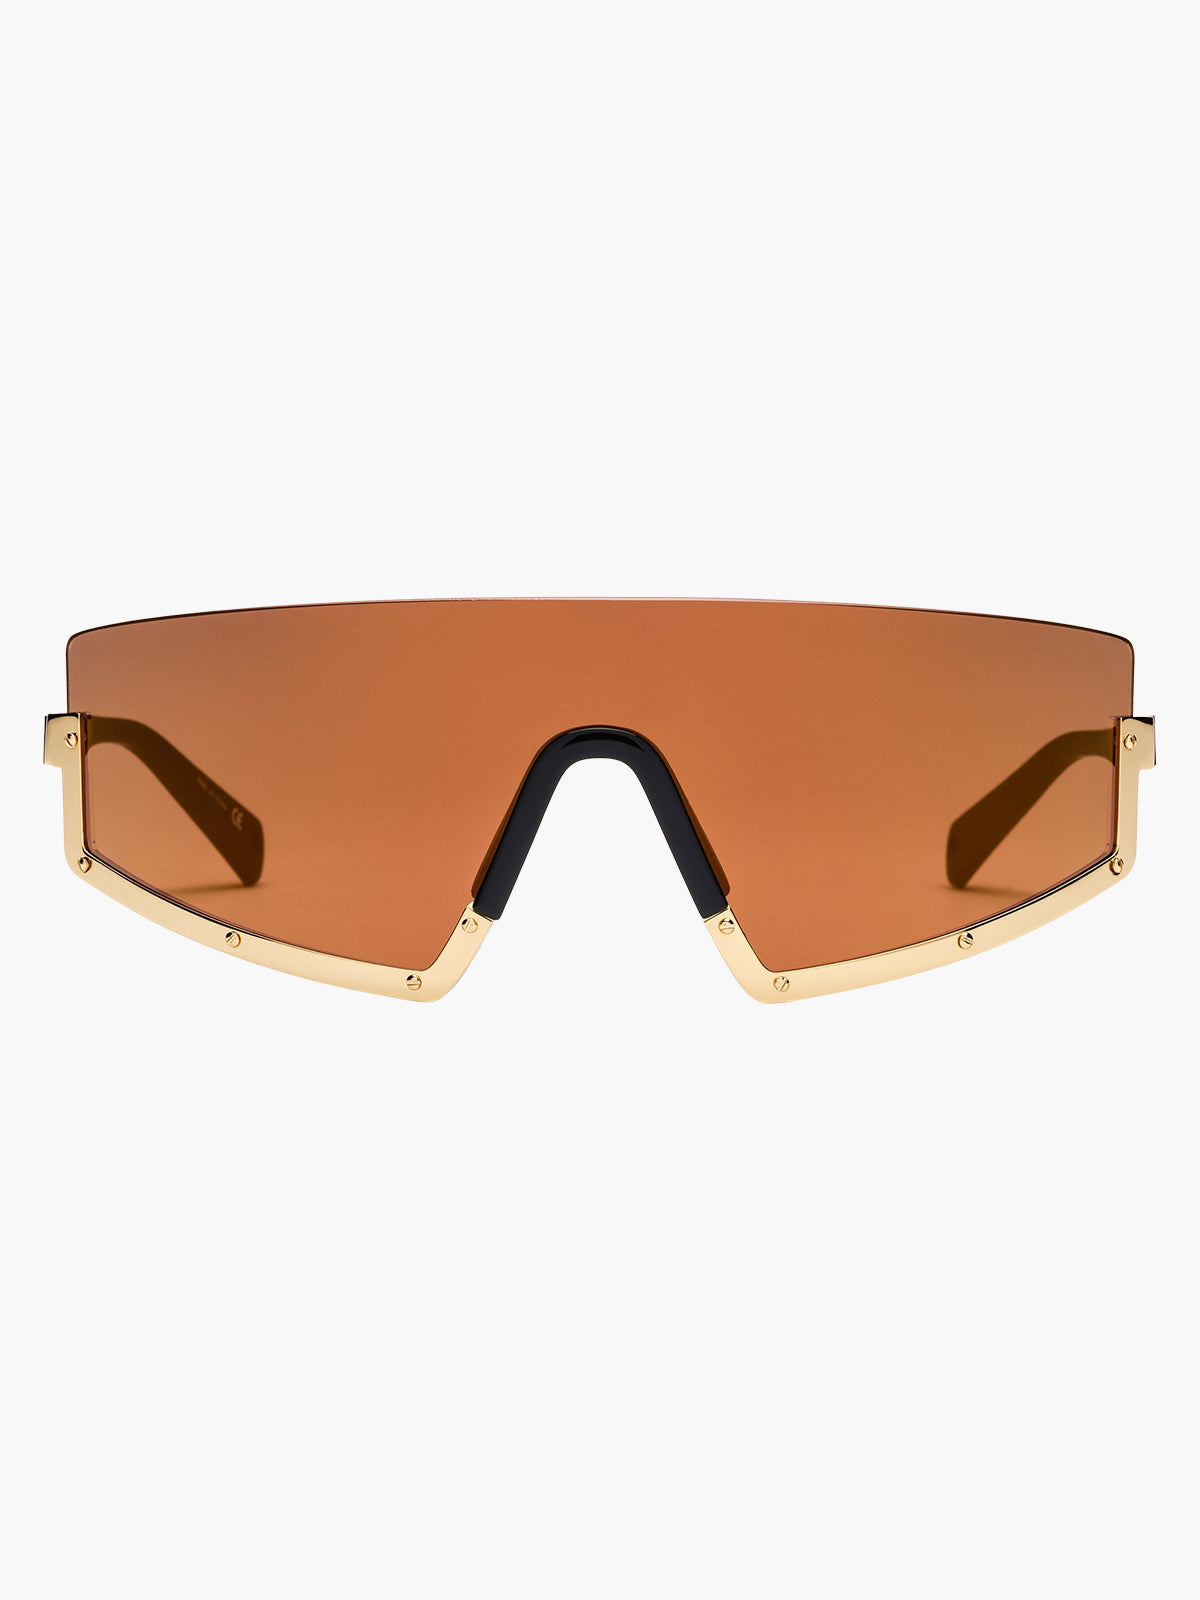 Stun | Polished Gold/Muted Gold Mirror Lens